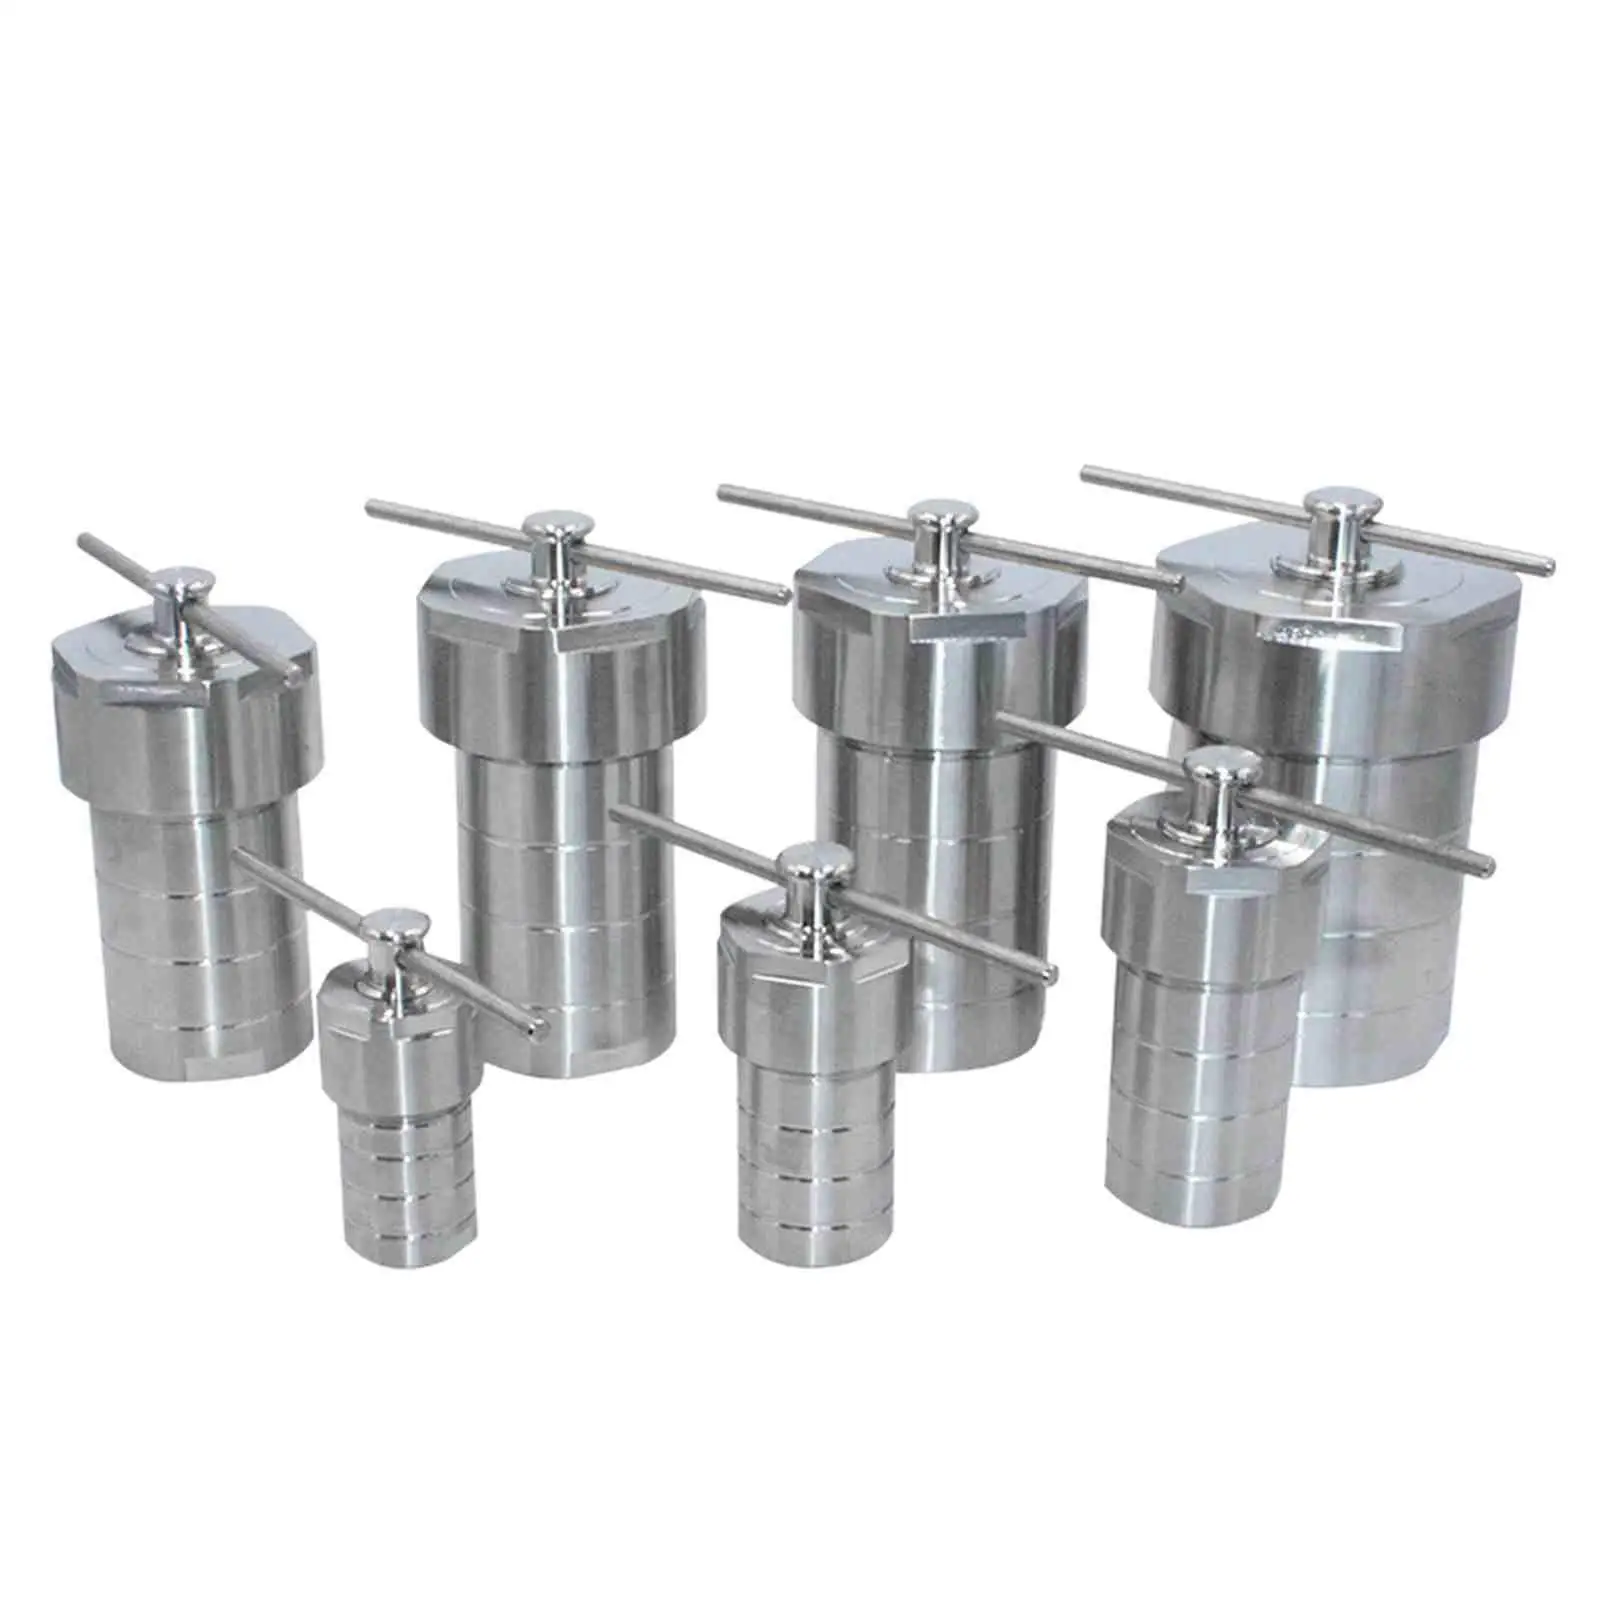 5ml 10ml 15ml 25ml PTFE Lined Hydrothermal Synthesis Autoclave Reactor Lined Vessel F4 Inner Sleeve High Pressure Digestion Tank